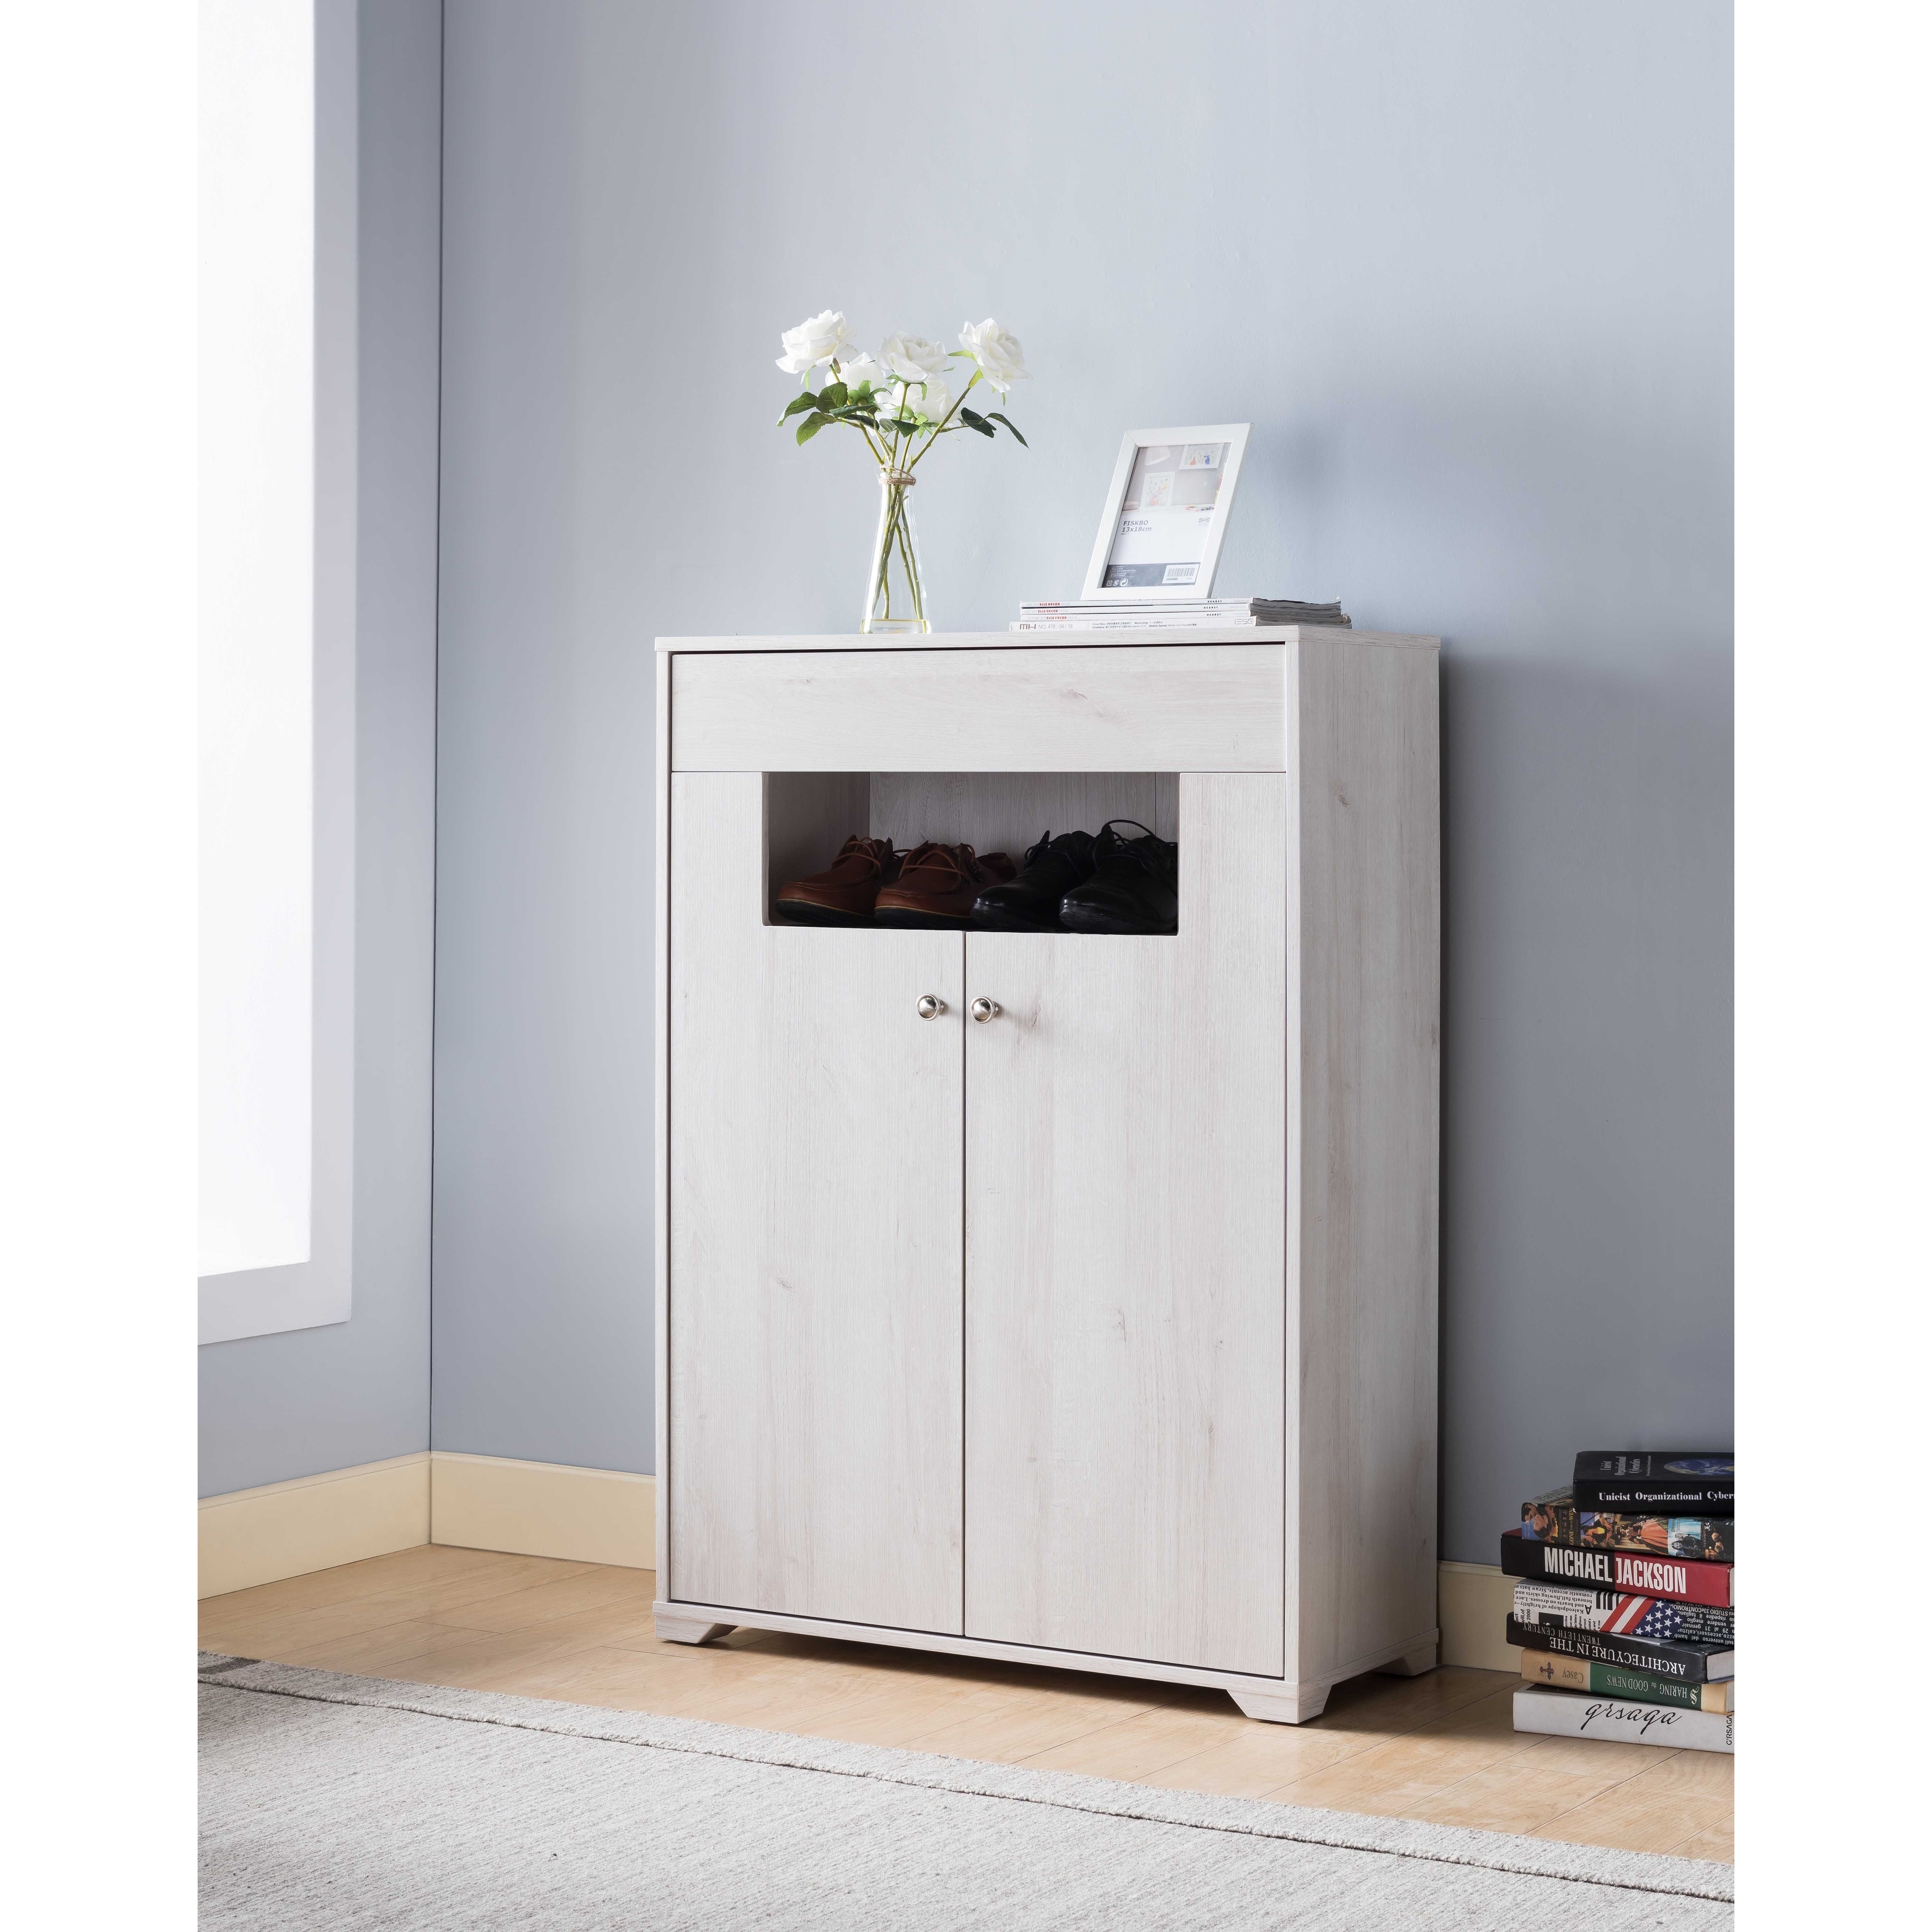 https://ak1.ostkcdn.com/images/products/is/images/direct/1da872a02f08a9beb37de452daf1ff8ec00751bd/Q-Max-Modern-and-Contemporary-Shoe-Storage-Cabinet-with-Five-Shelves.jpg